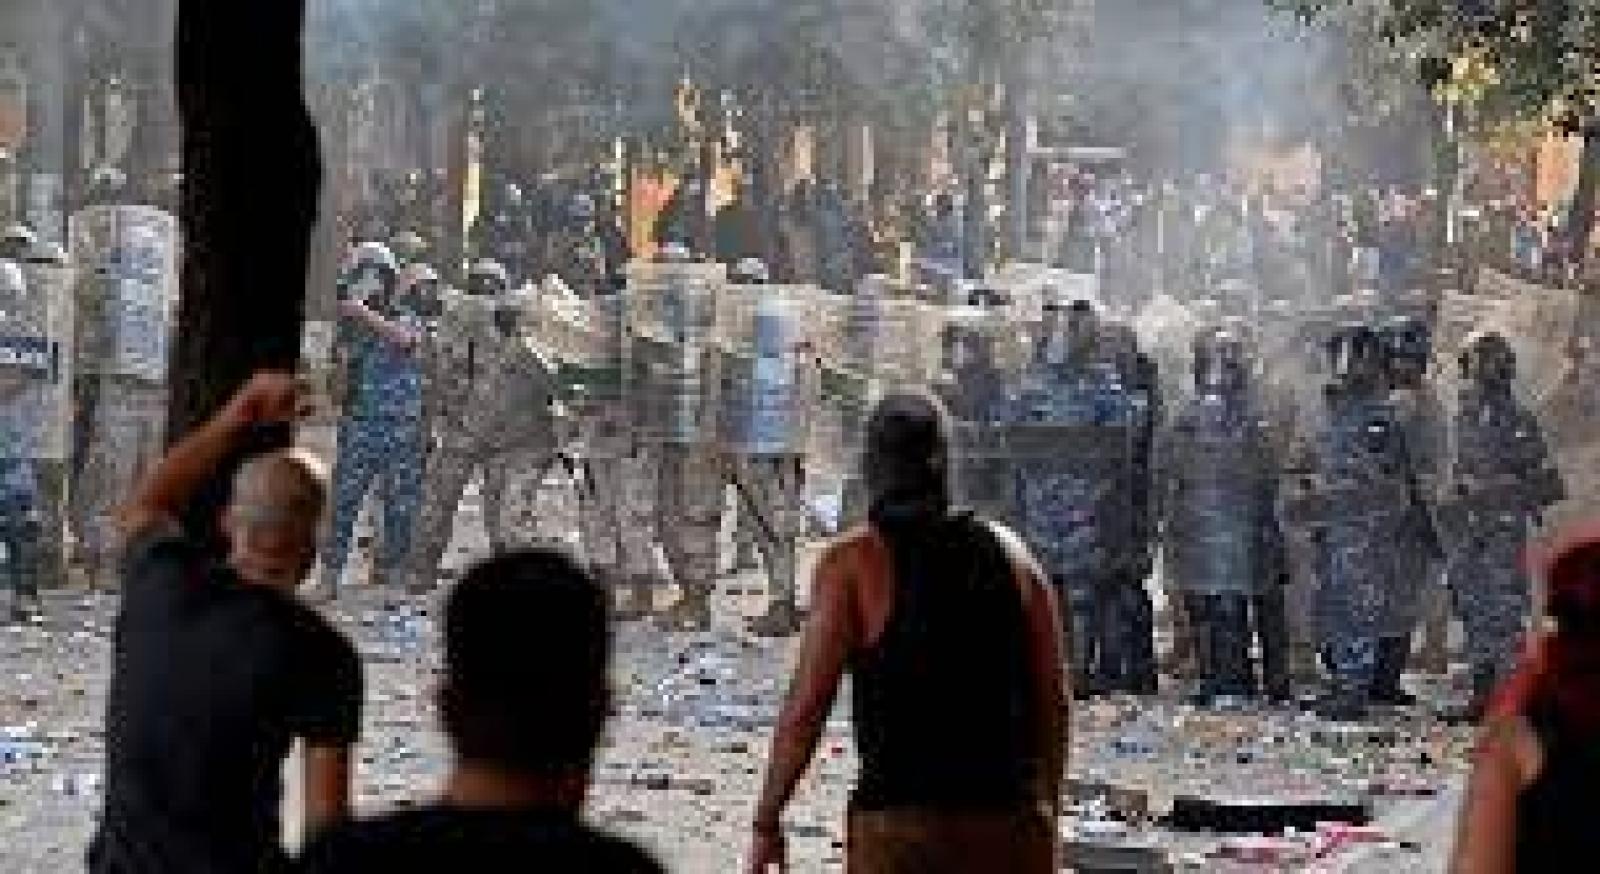 The Lebanese army and security forces responded with a shoot-to-harm policy against unarmed protesters, downtown Beirut, Amnesty International, August 10, 2020.